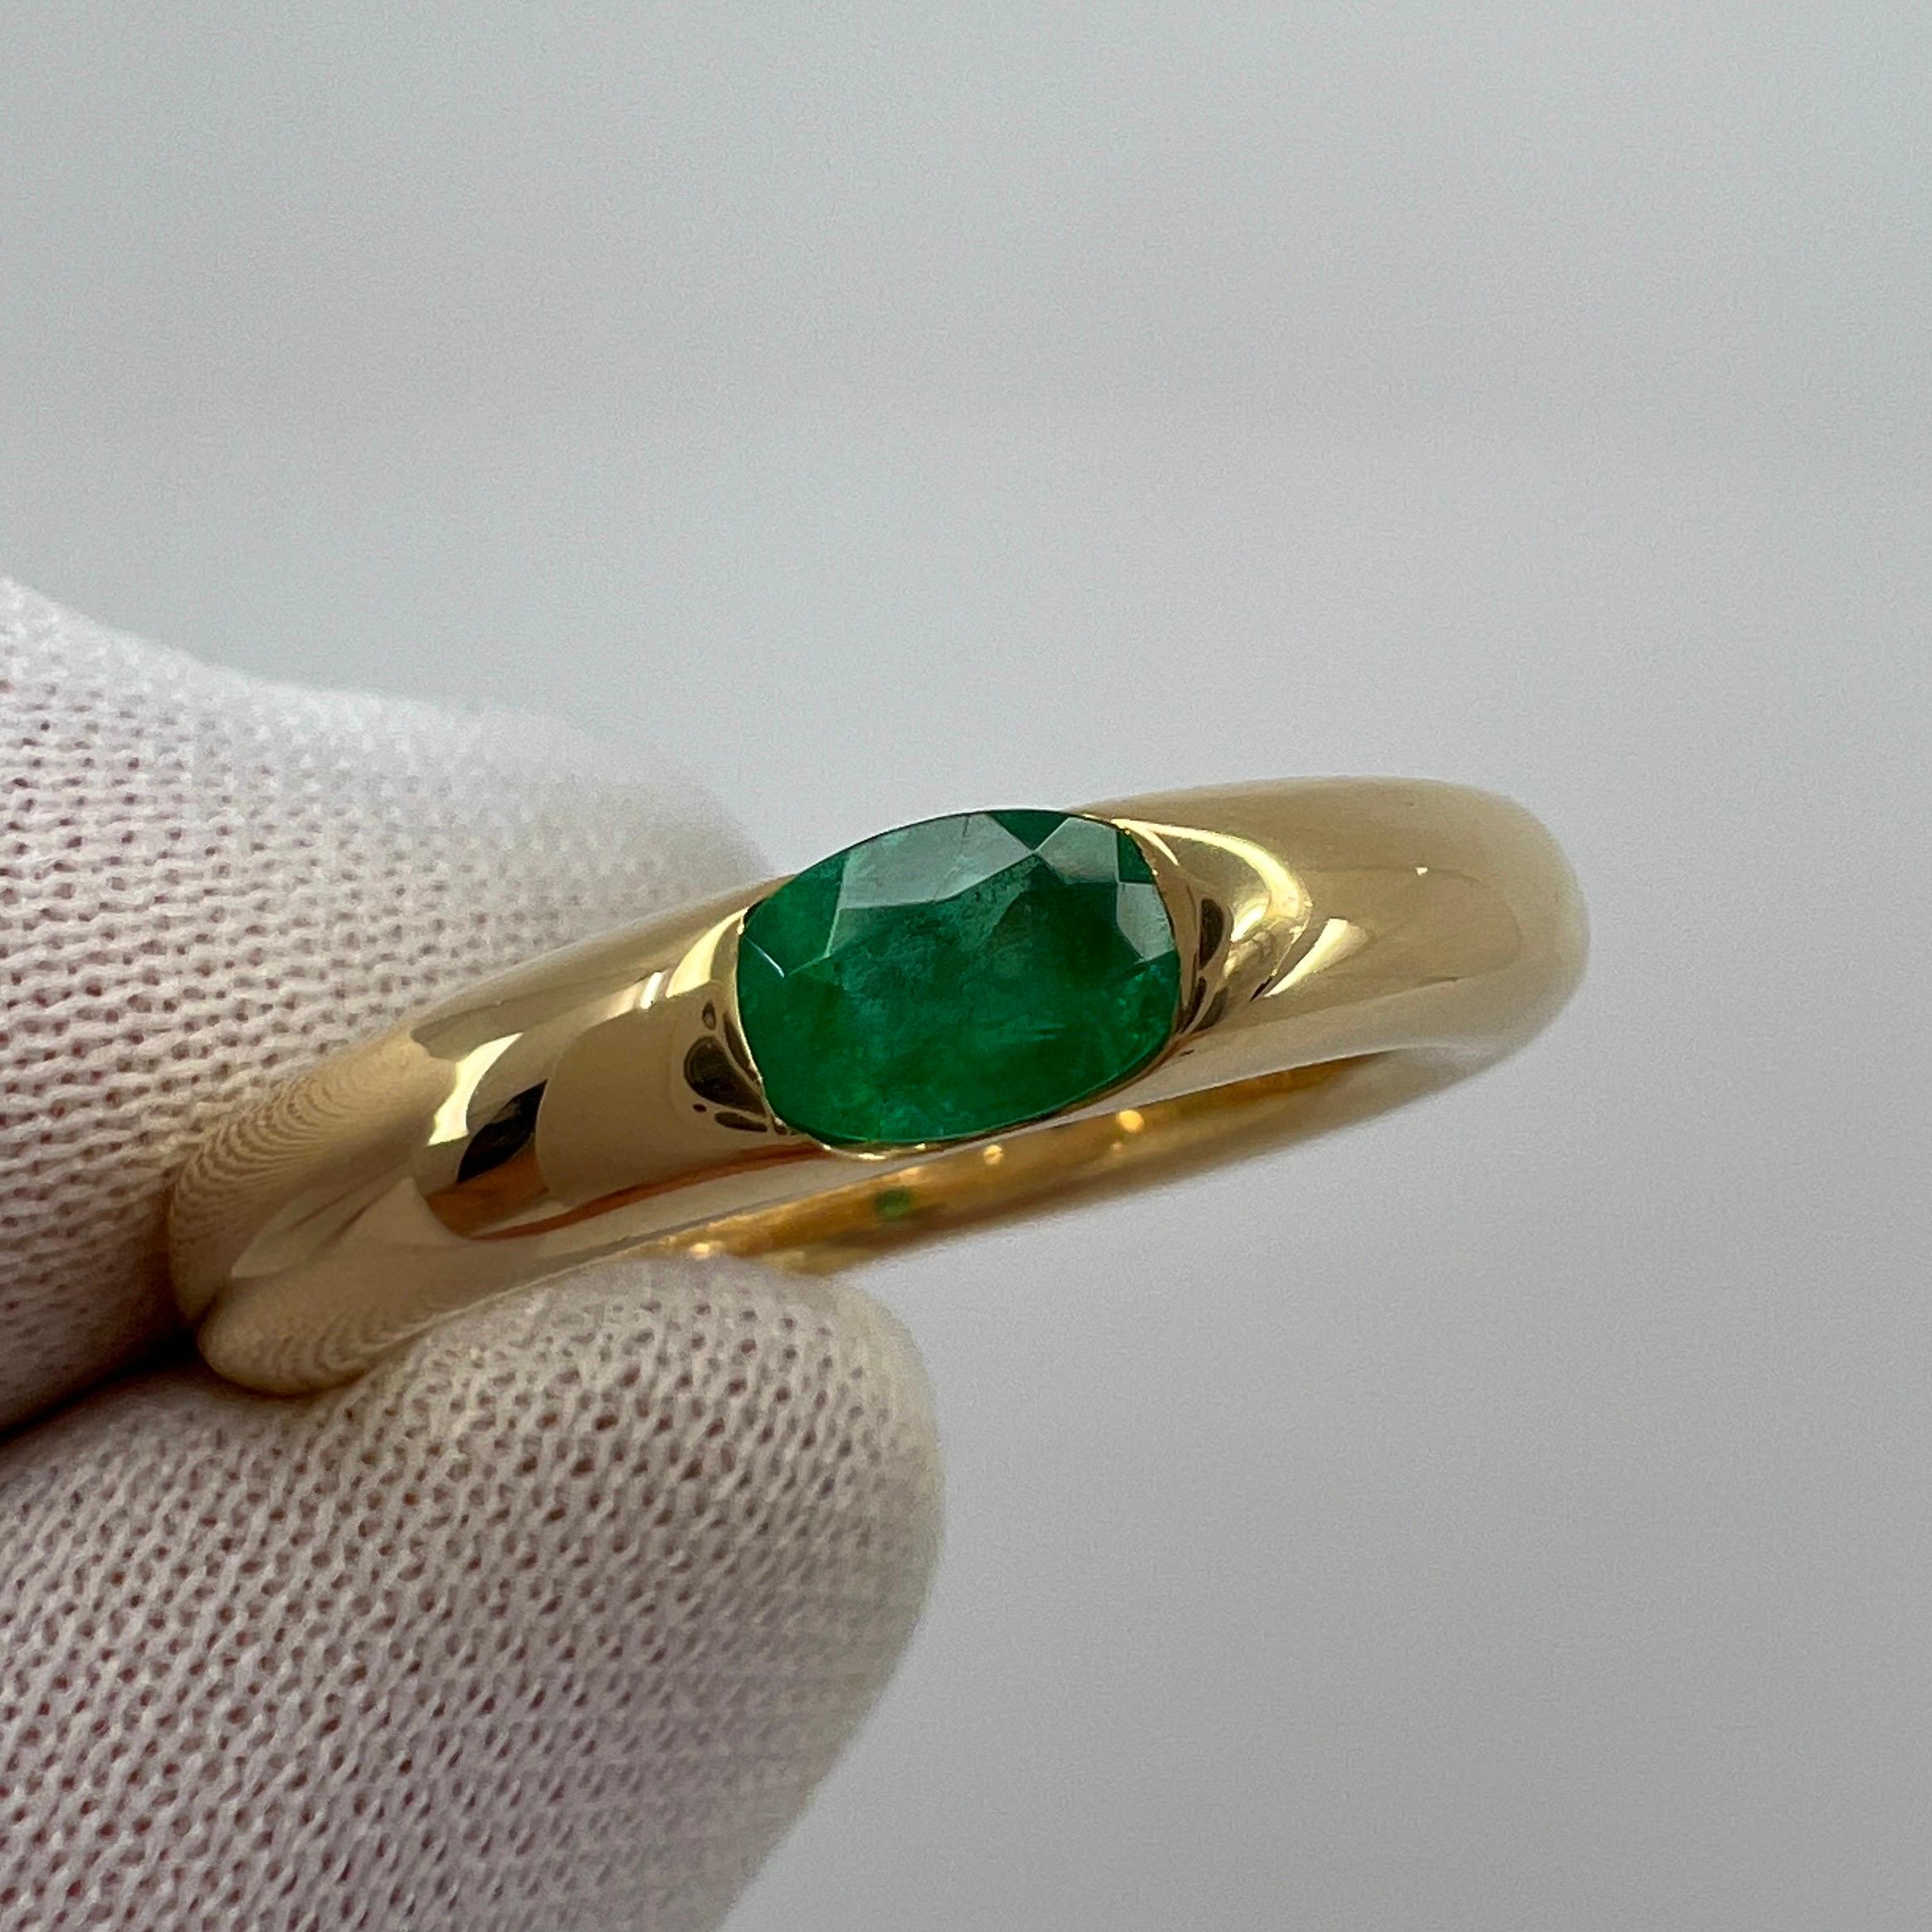 Oval Cut Vintage Cartier Vivid Green Emerald Ellipse 18k Yellow Gold Solitaire Ring